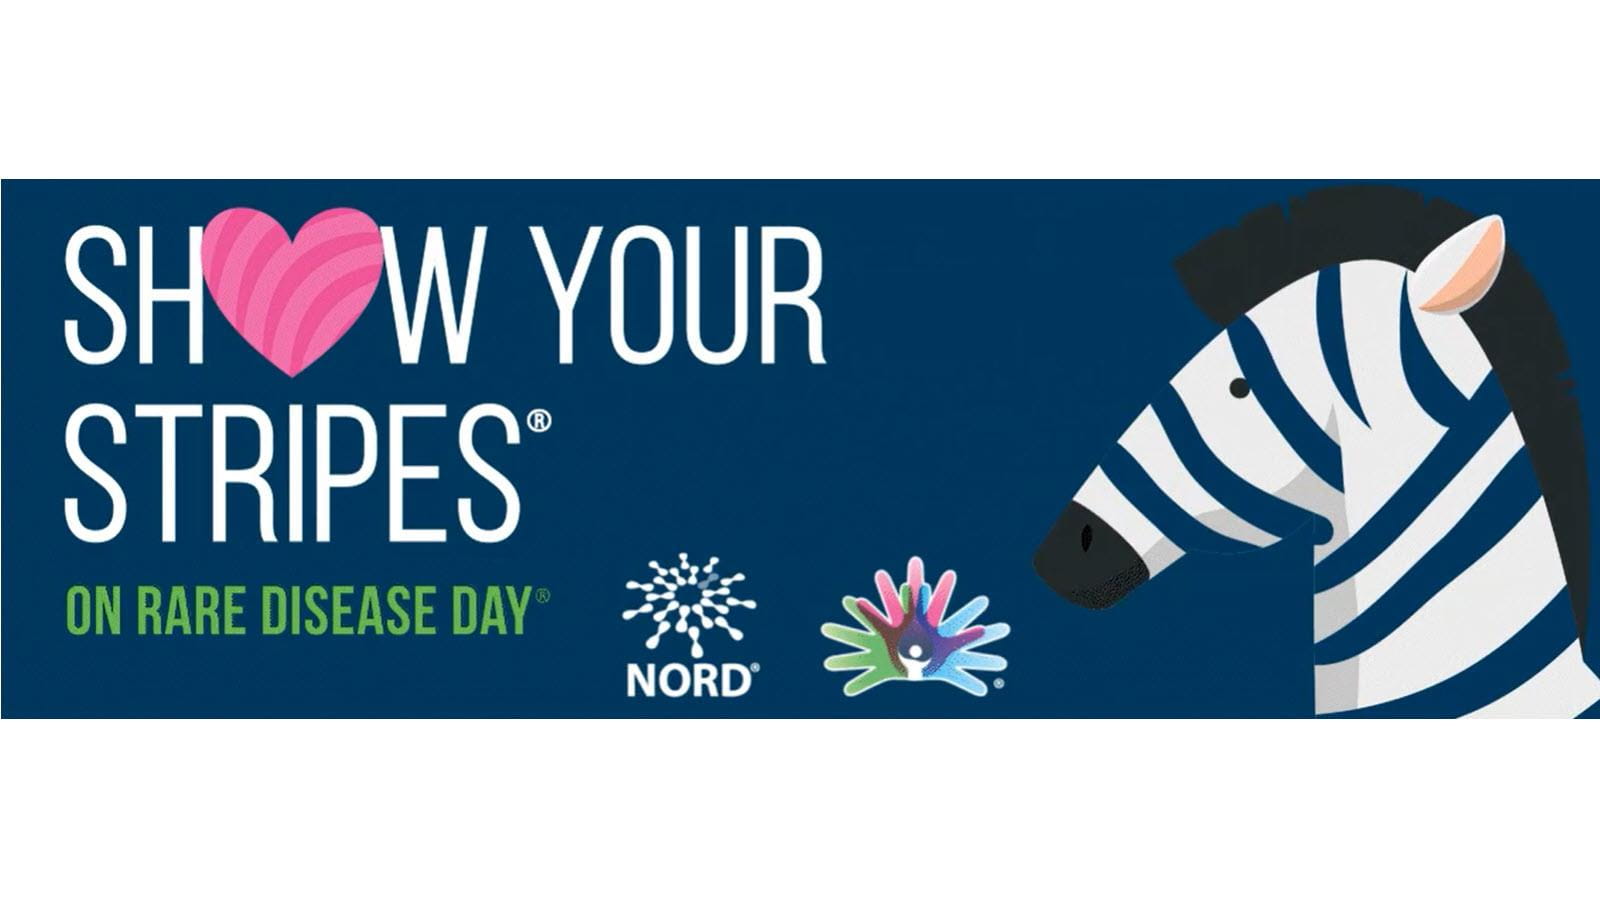 Show Your Stripes message for Rare Disease Day with zebra against a blue background